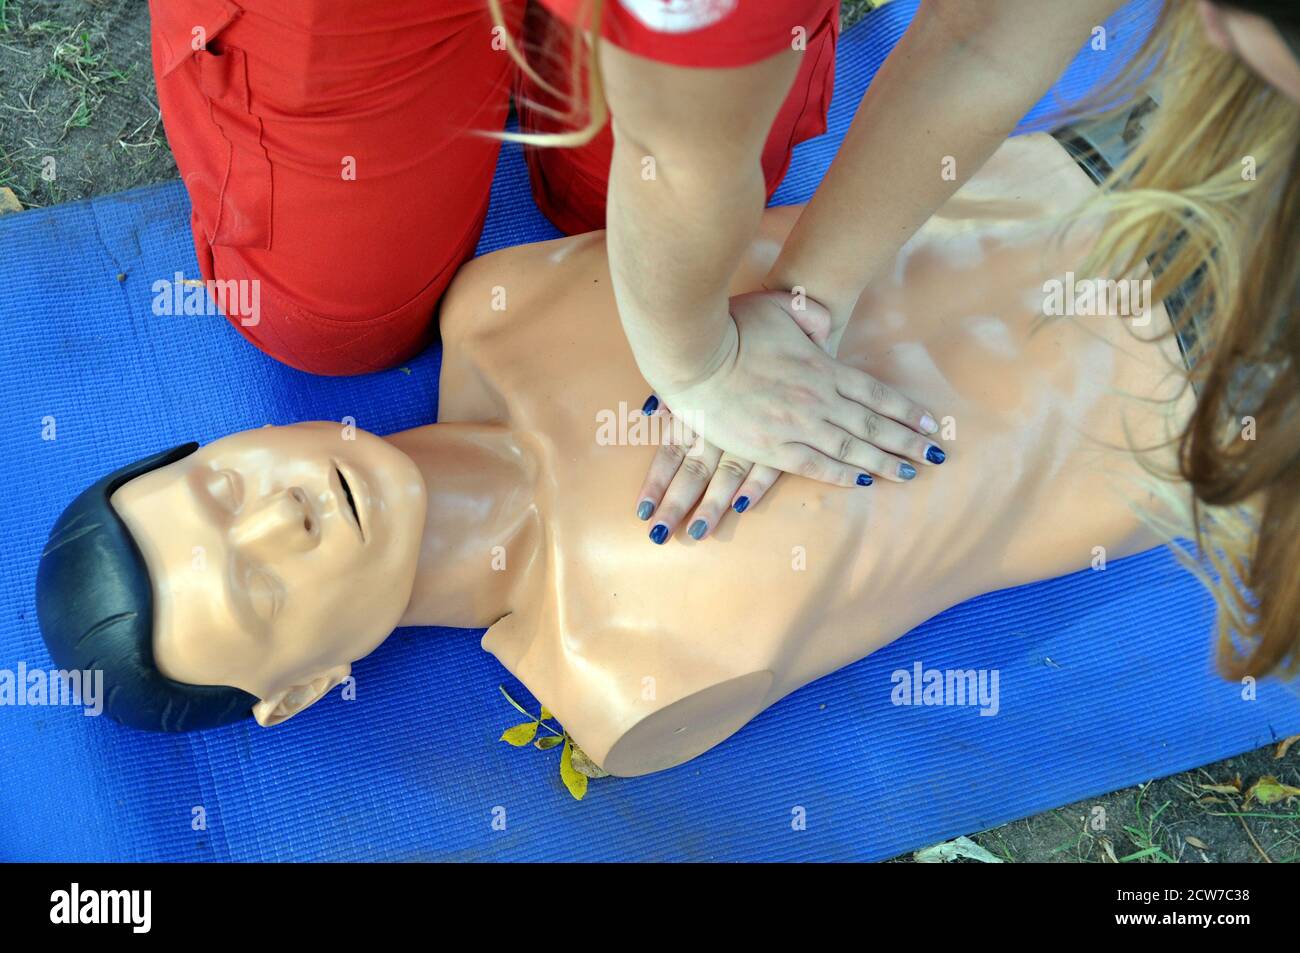 dummy for training in the implementation of resuscitation measures. Indirect cardiac massage. Stock Photo